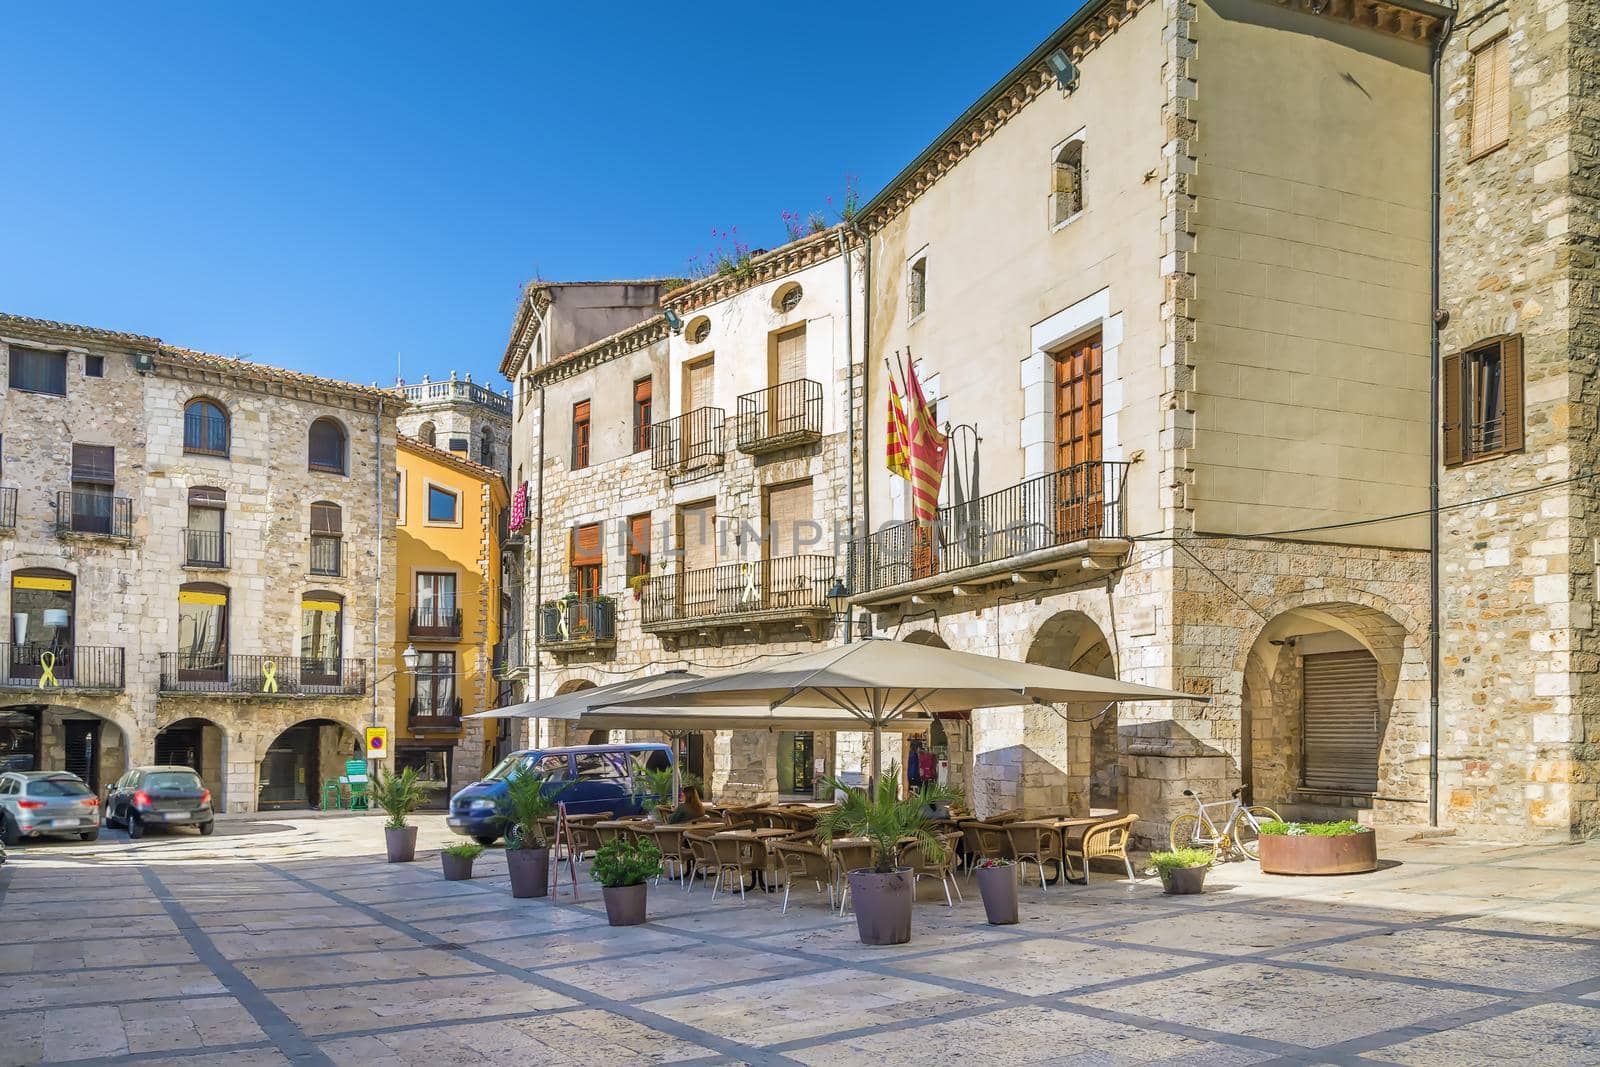 Square in historical center of Besalu city, Spain